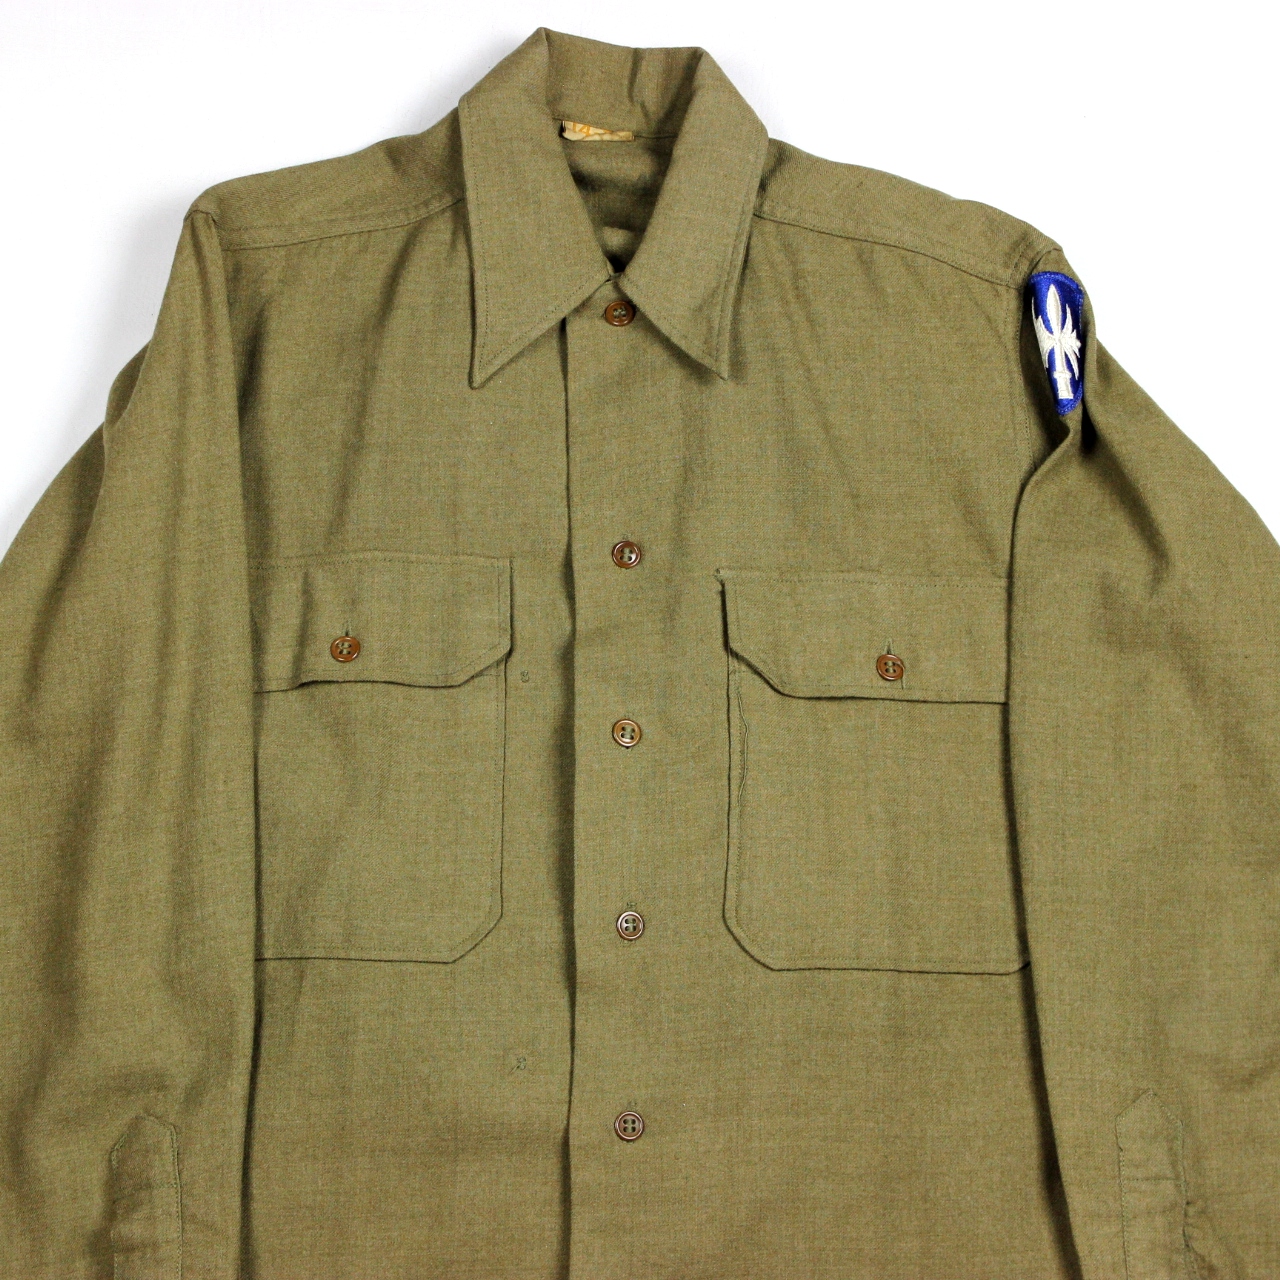 US Army wool flannel service shirt - 65th Infantry Div.